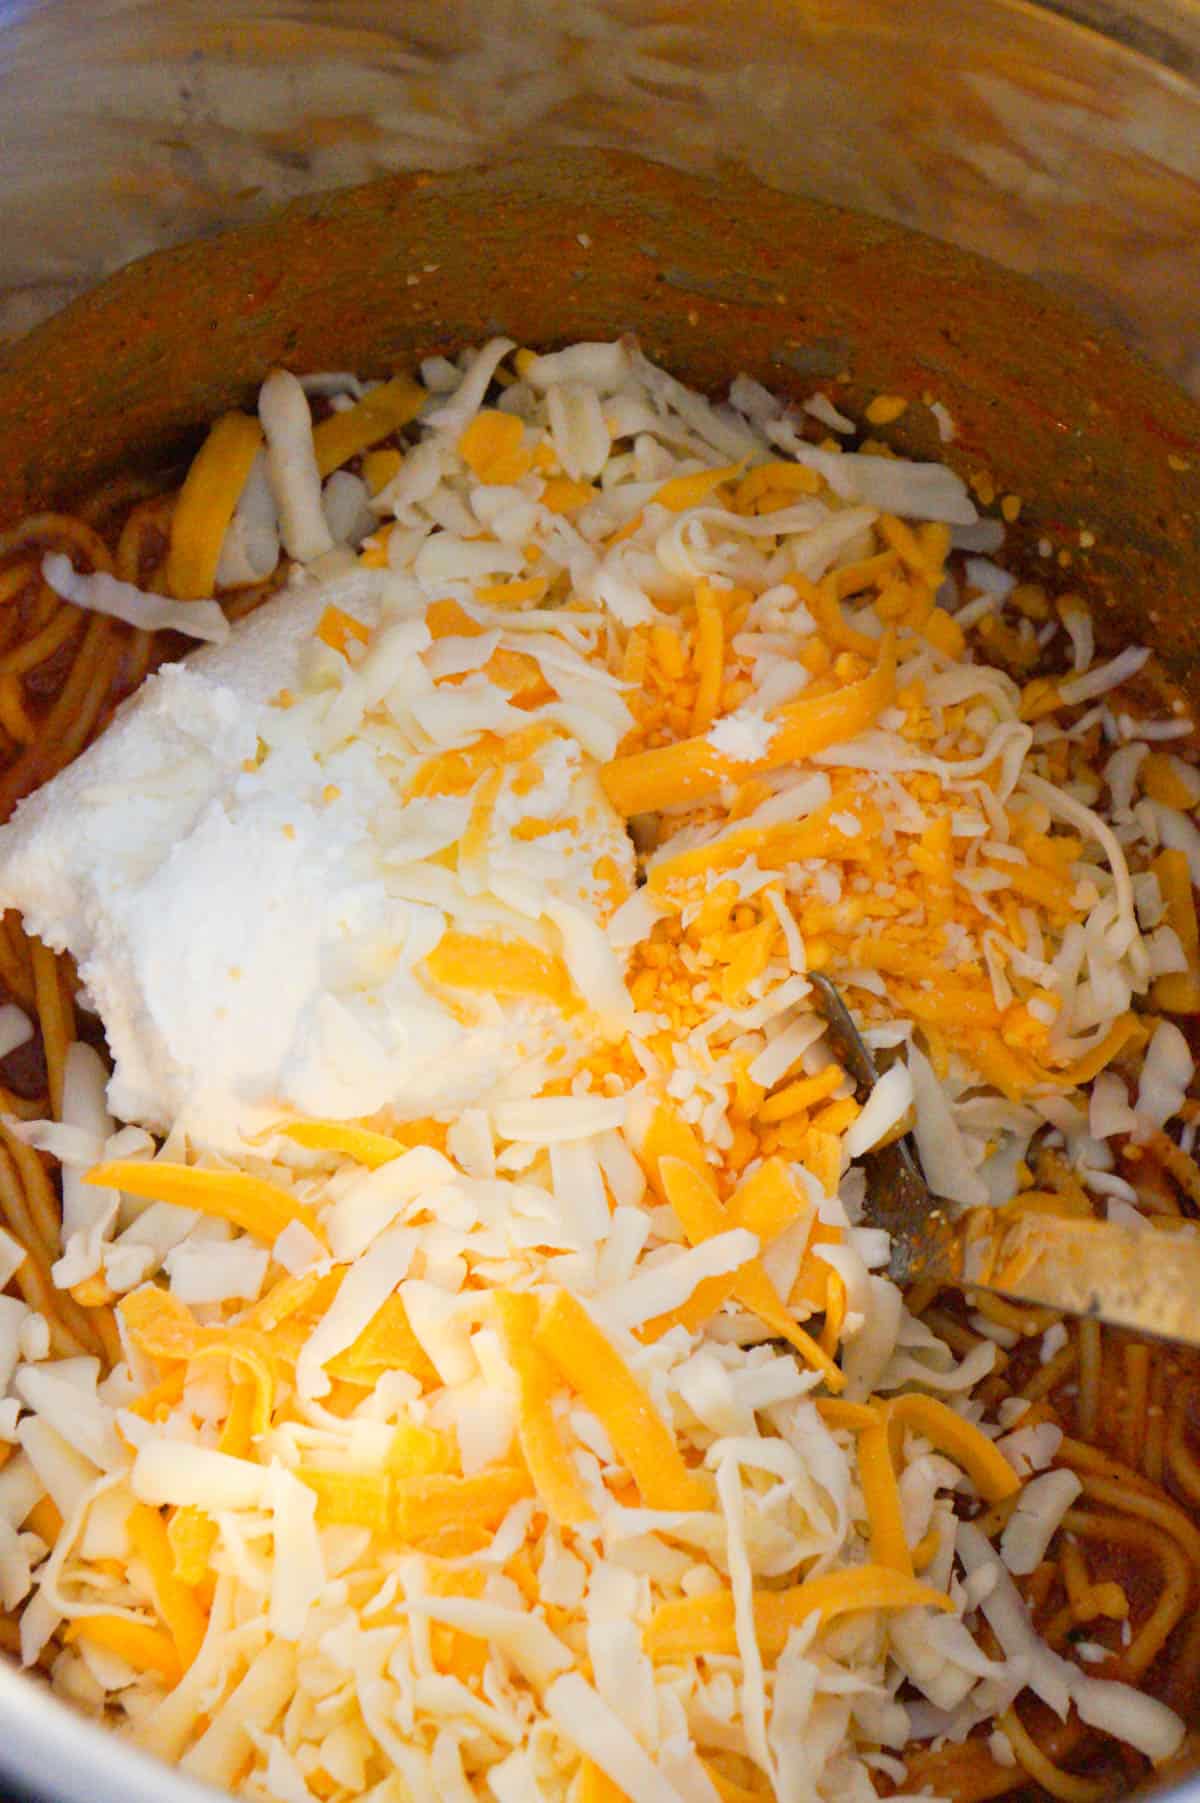 ricotta and shredded cheddar and mozzarella on top of cooked spaghetti in an Instant Pot